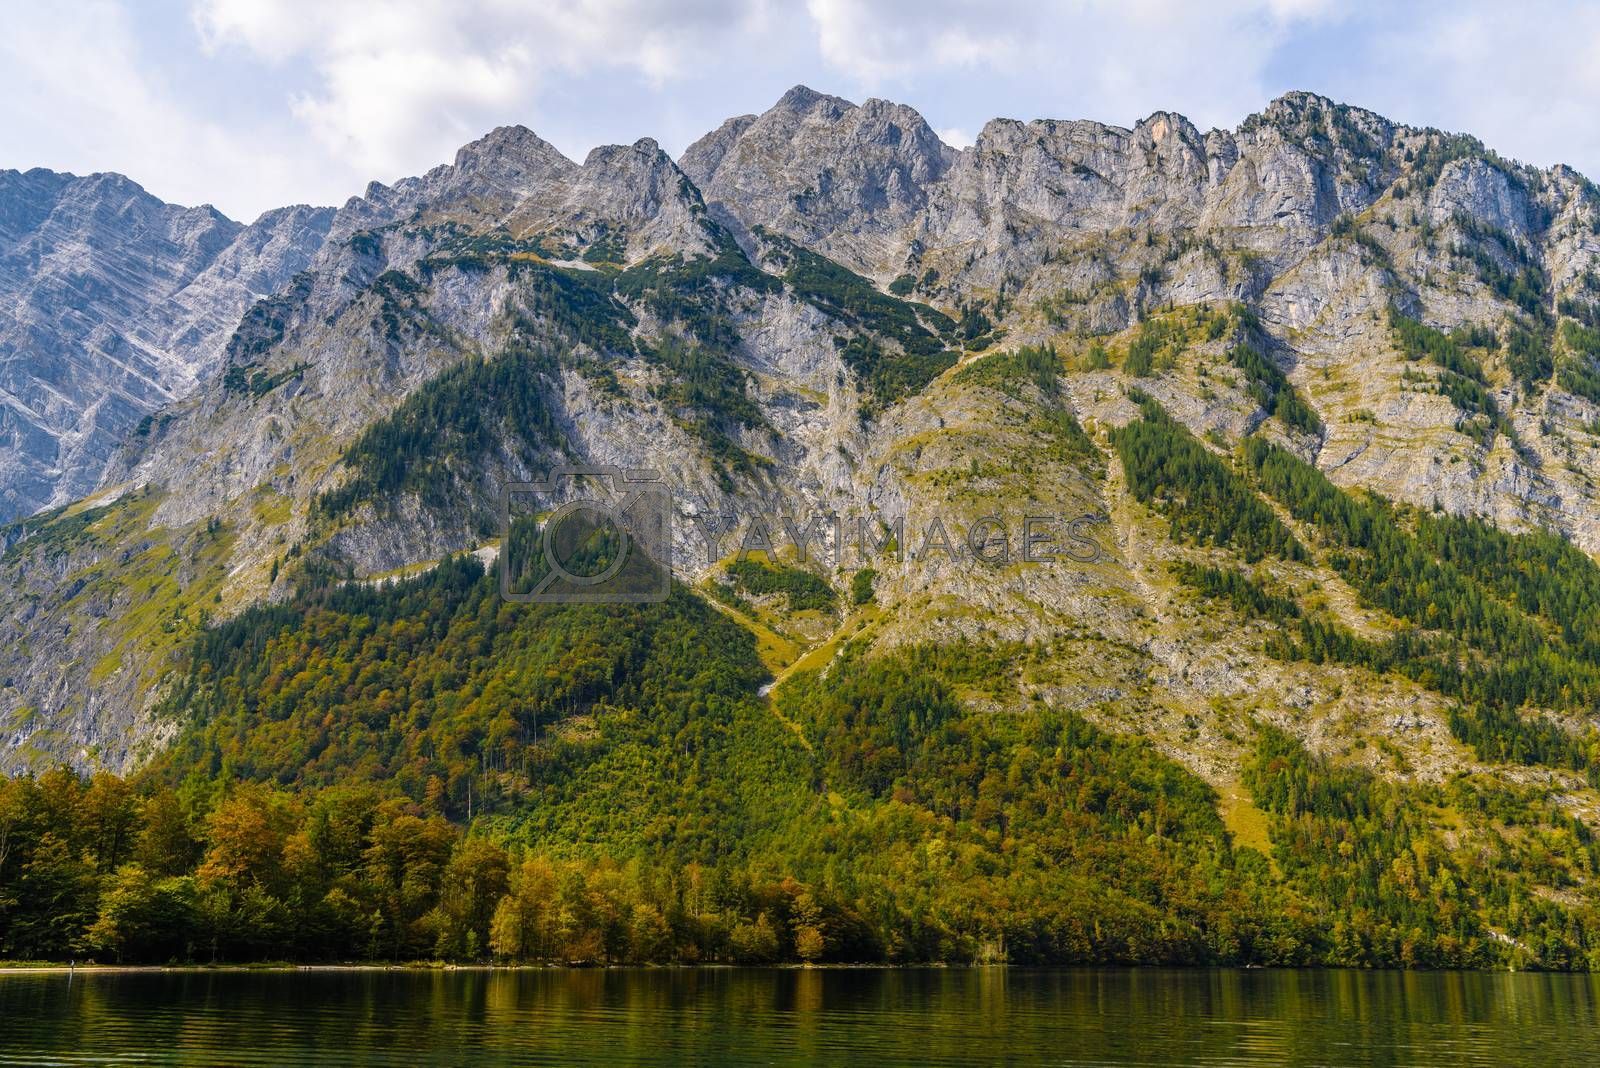 Koenigssee lake with Alp mountains, Konigsee, Berchtesgaden National Park, Bavaria, Germany Royalty Free Stock Image. , Royalty Free Image, Vectors, Footage